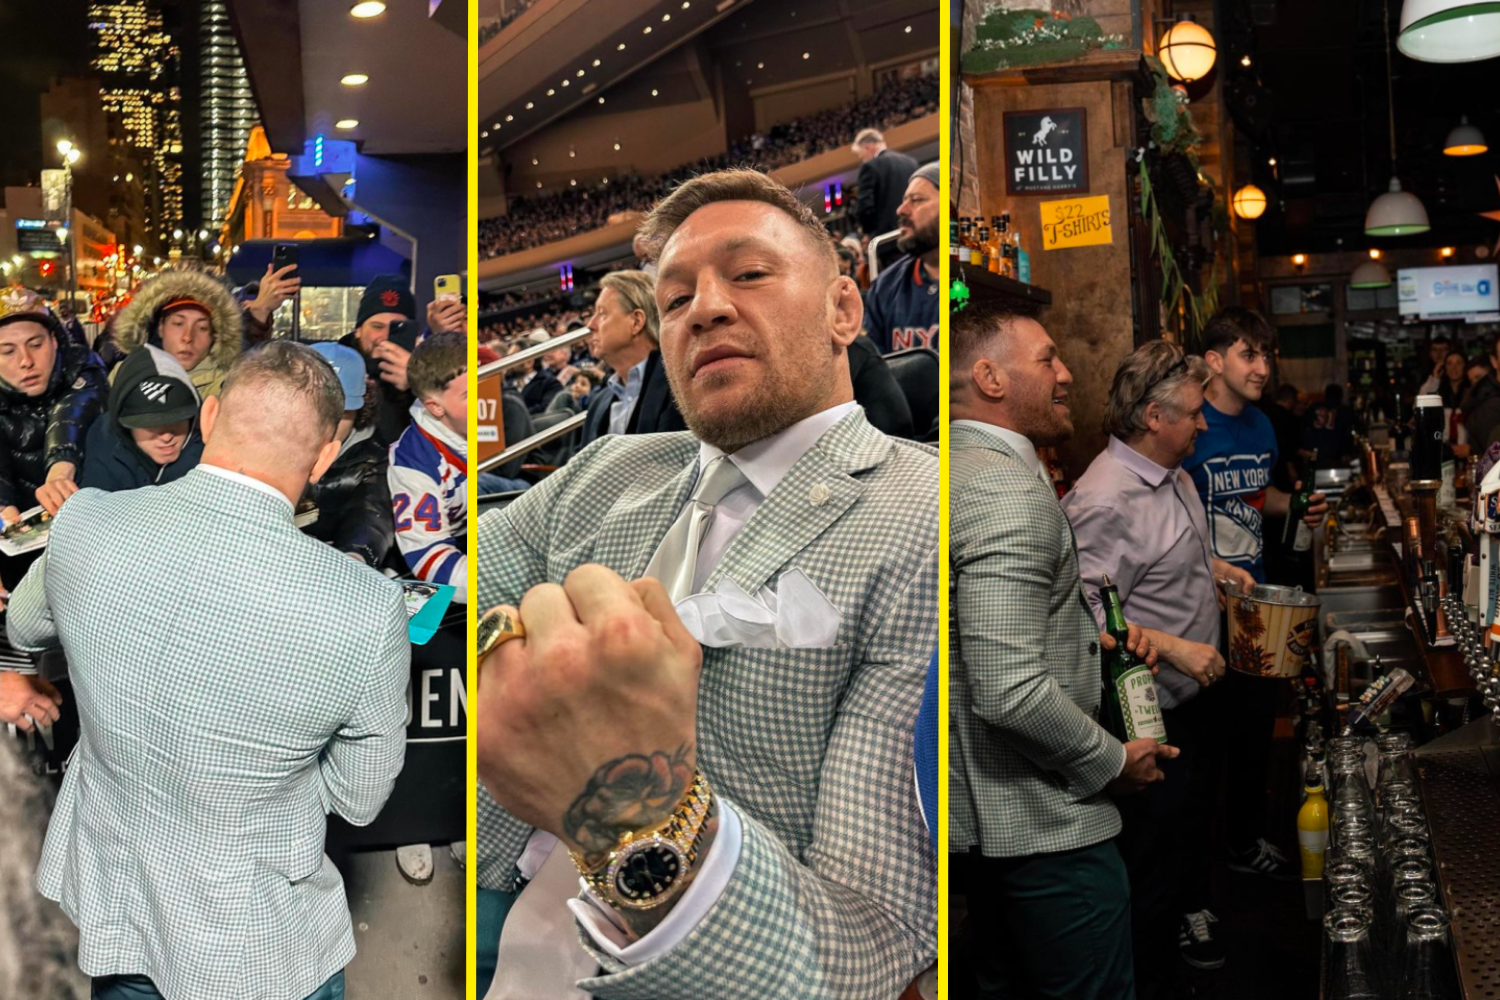 UFC star Conor McGregor watches New York Rangers game in suit and £108,000 Rolex before pouring whiskey for fans